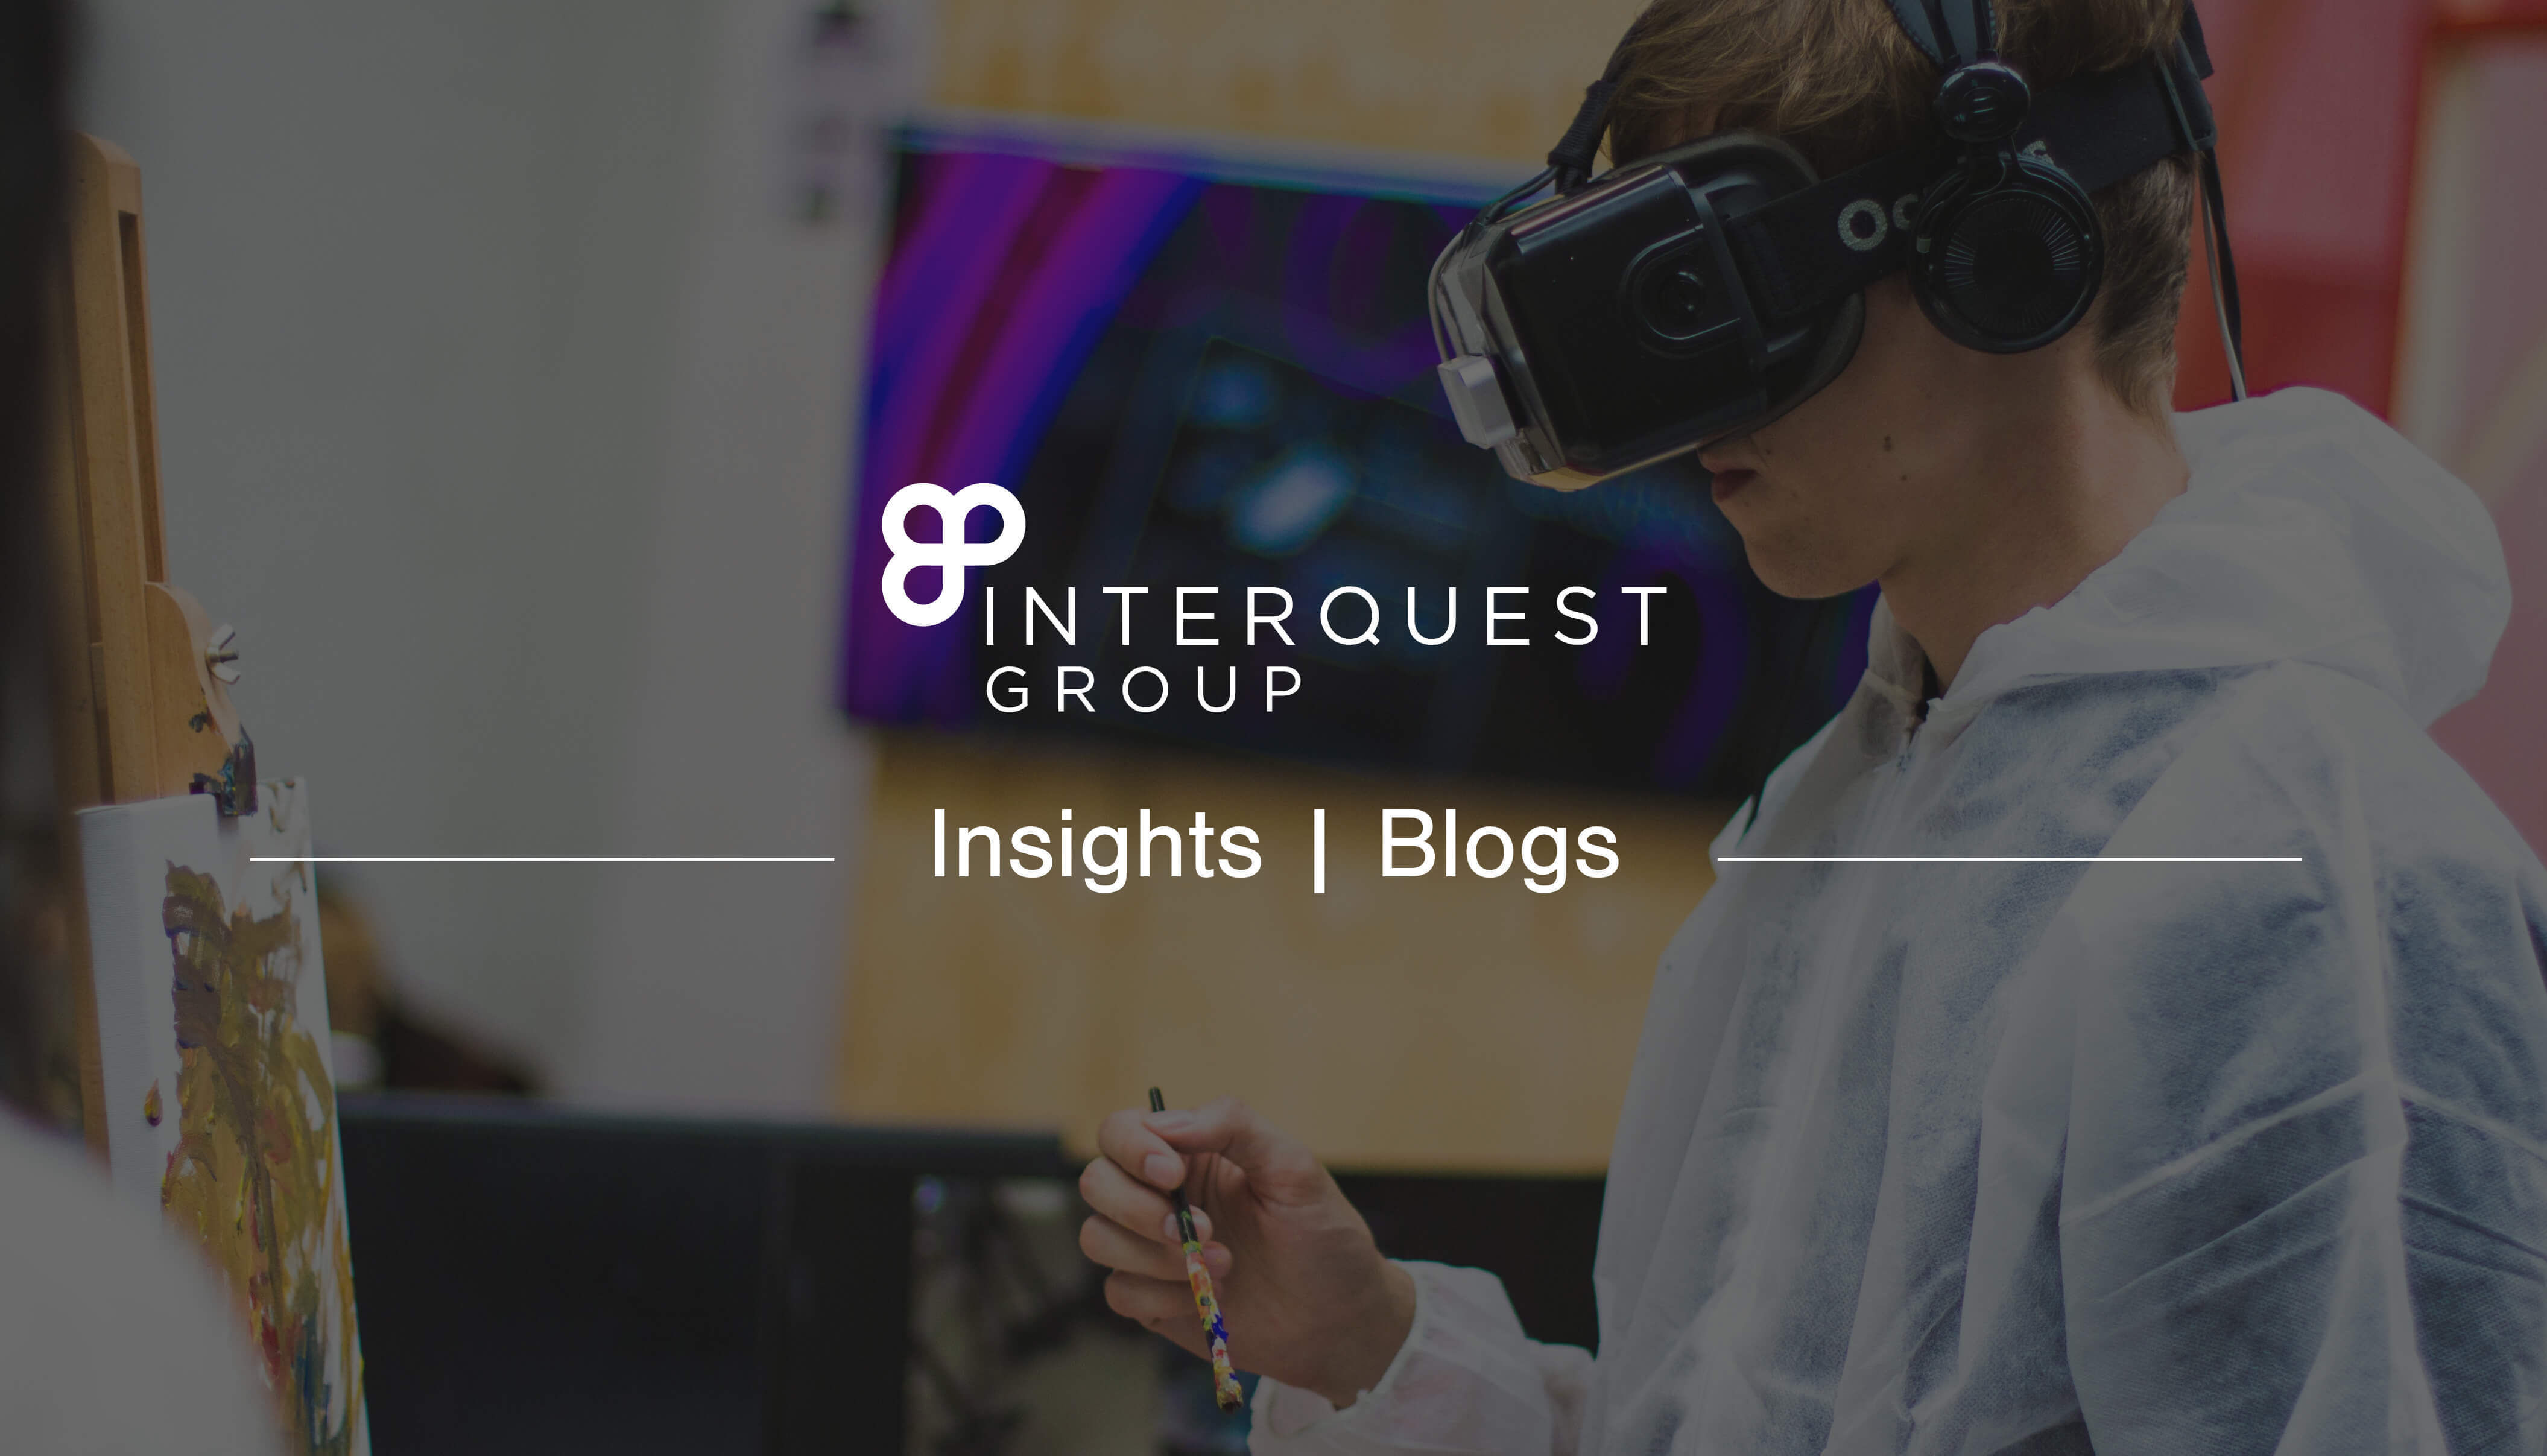 InterQuest Group insights banner with an image of a person using a virtual reality headset